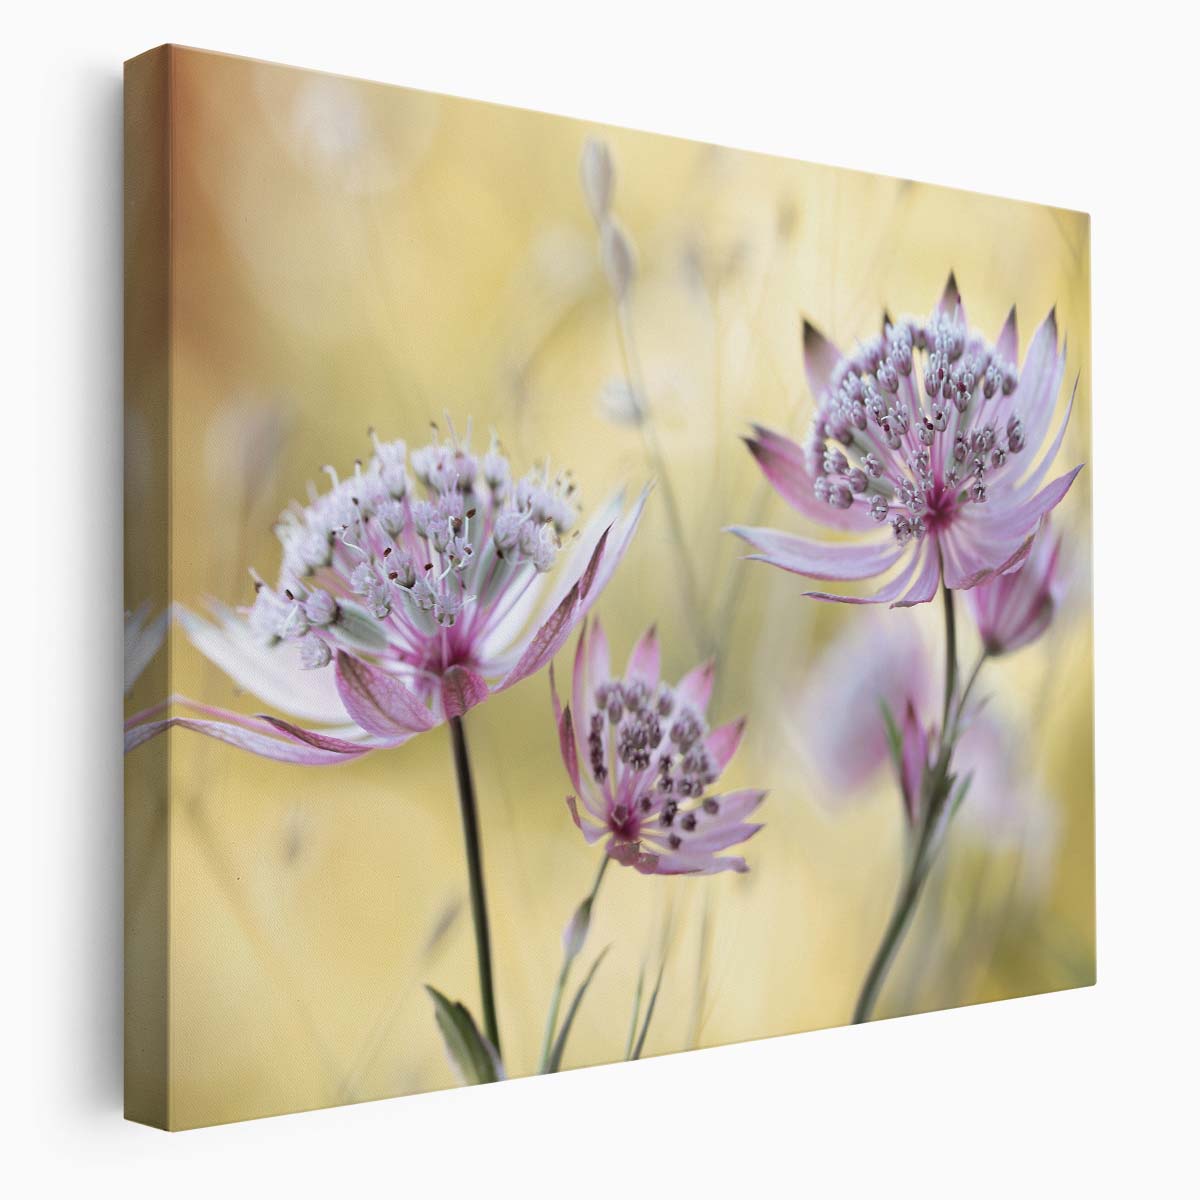 Summer Pink Astrantia Major Floral Macro Wall Art by Luxuriance Designs. Made in USA.